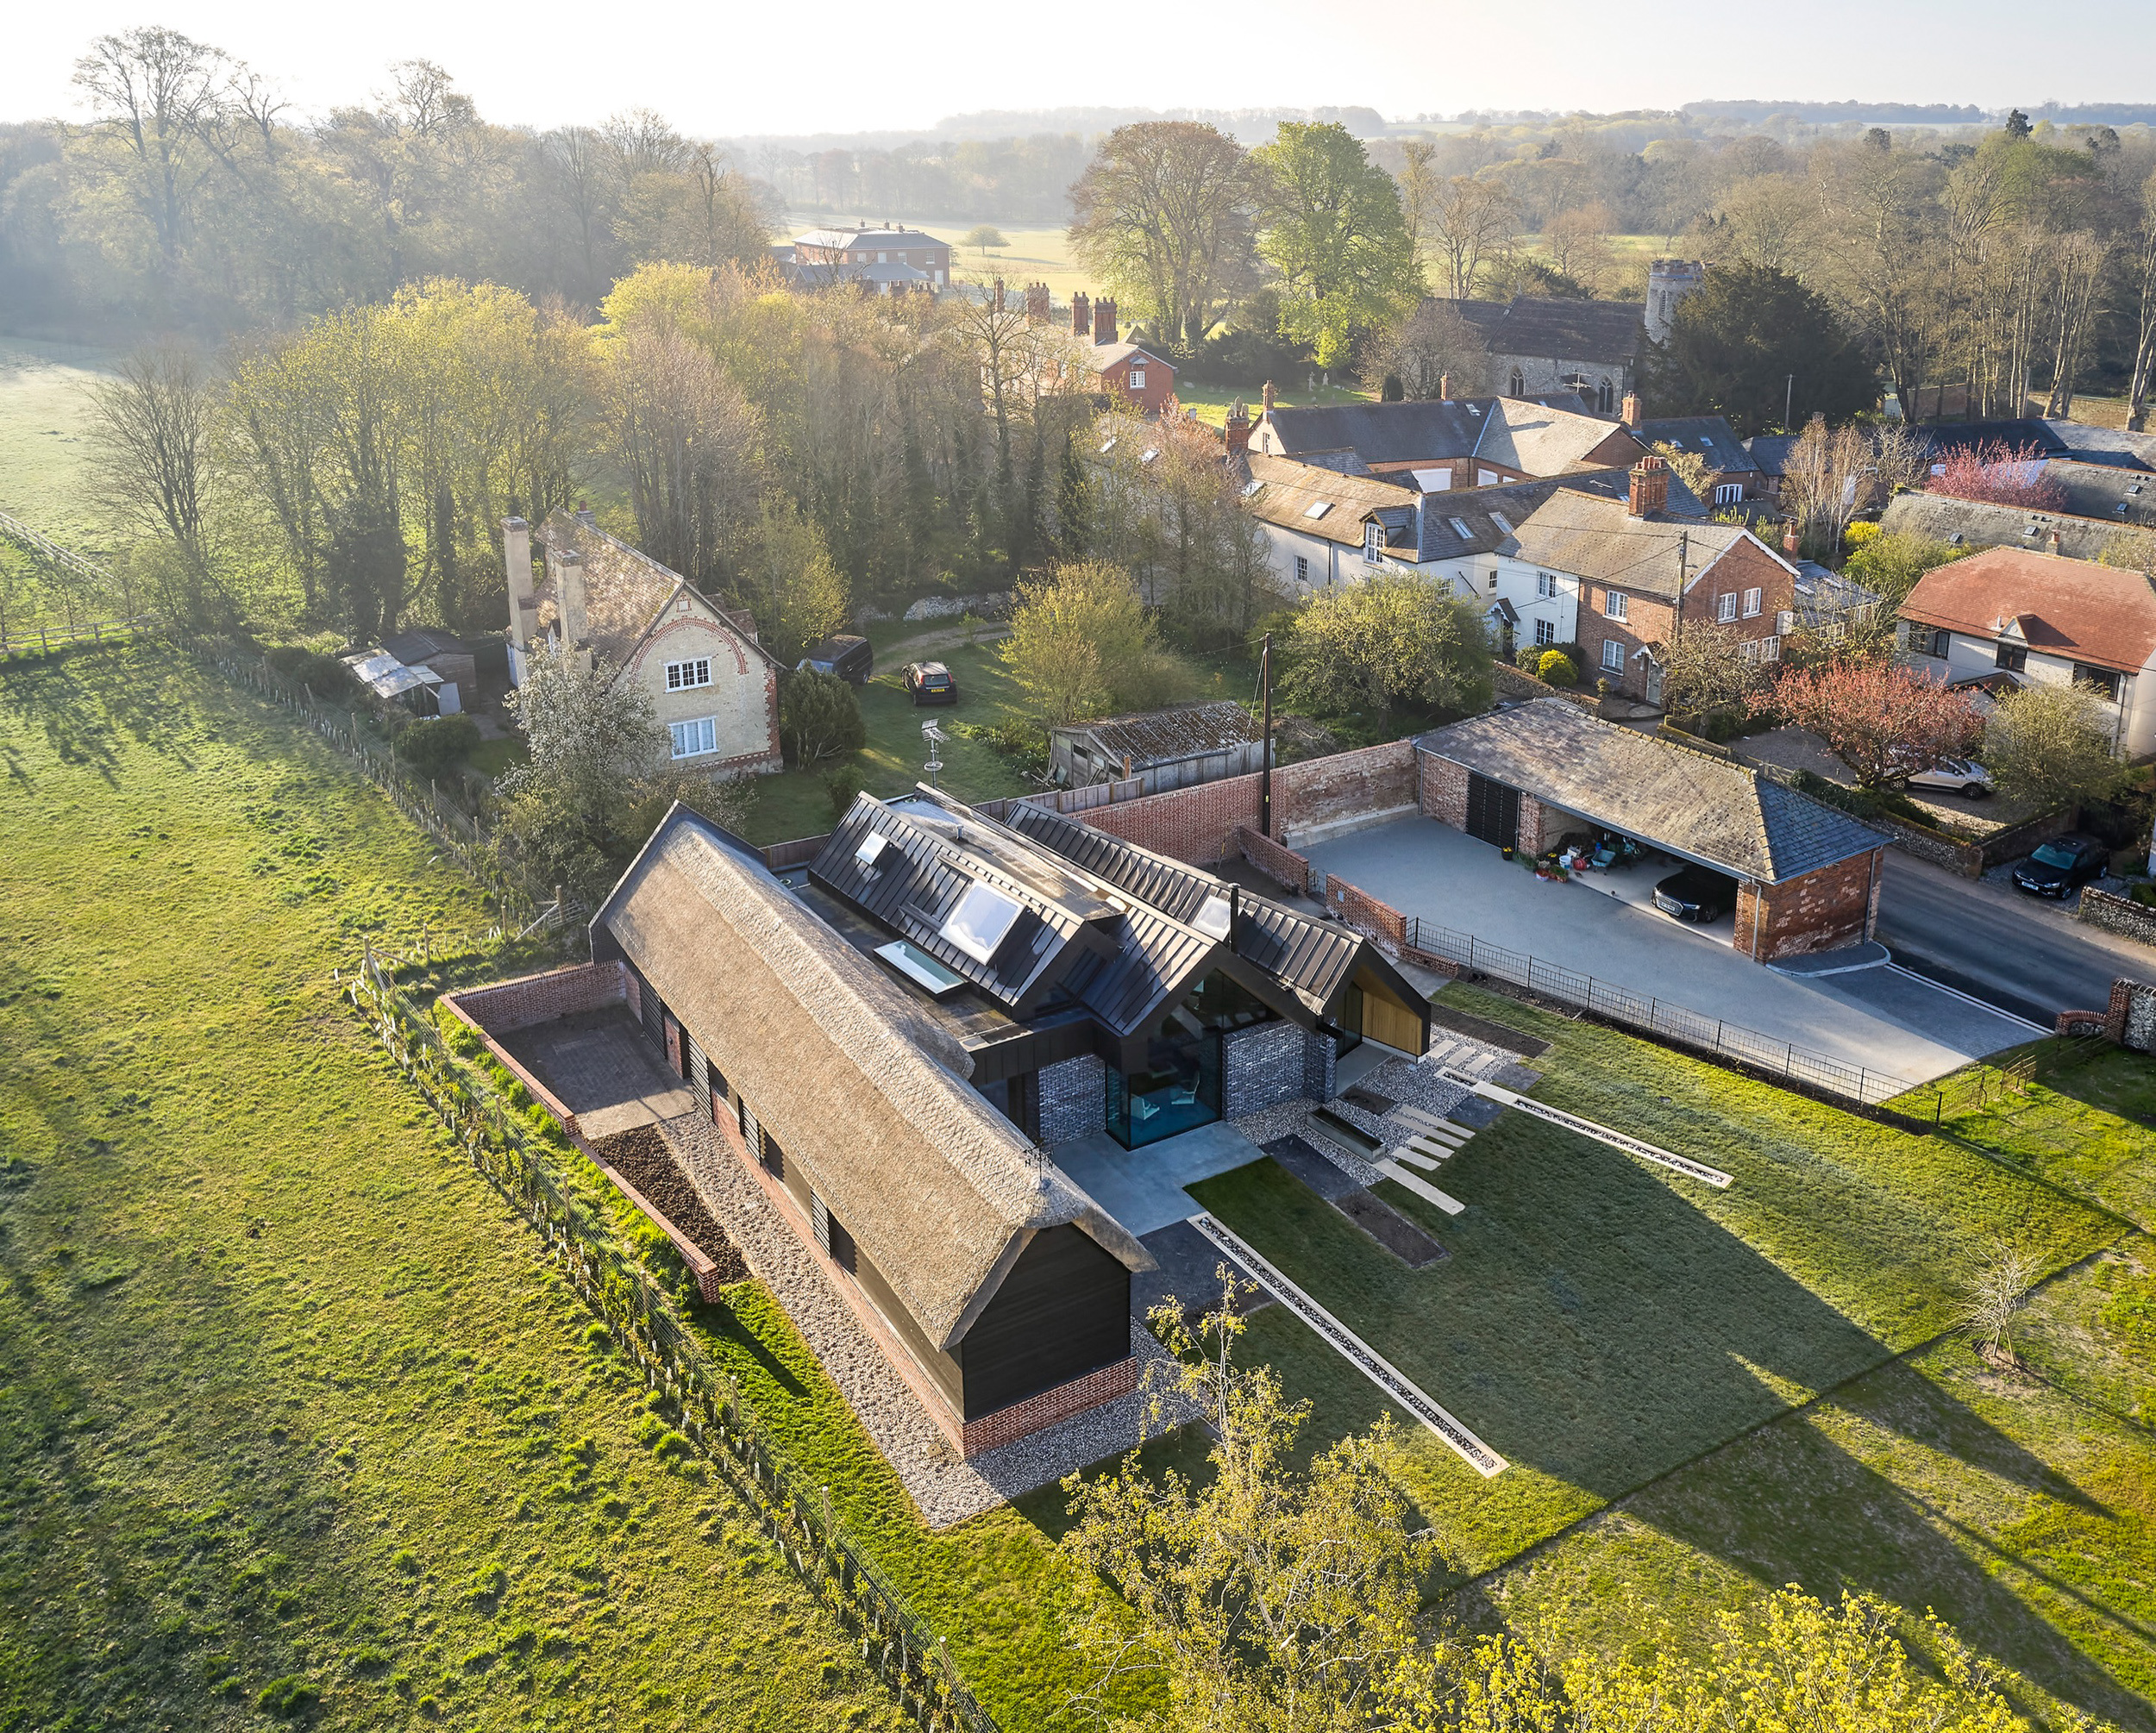 Aerial view of sunrise over thatch and zinc cambridgeshire roof | cdc studio cambridge architects